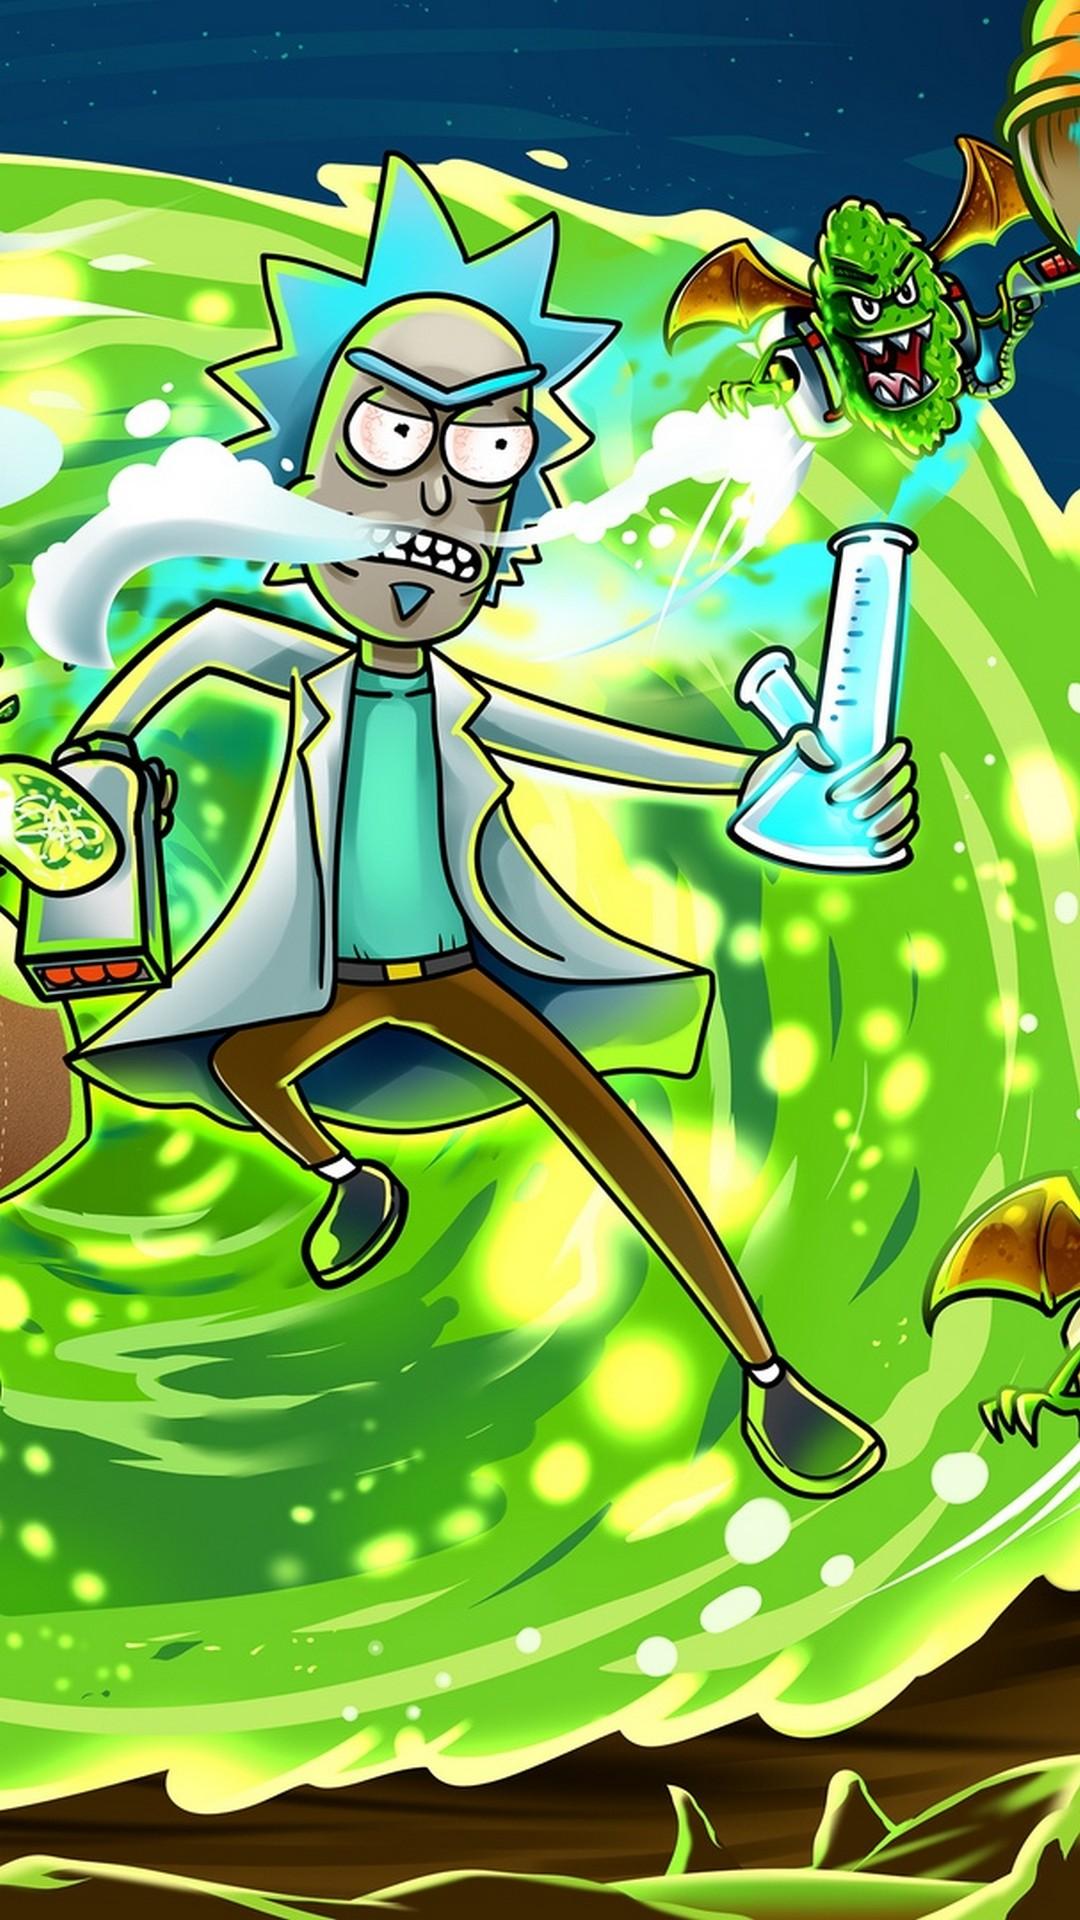 Weed Rick And Morty Background Wallpaper By Graywolf88 69 Free On Zedge